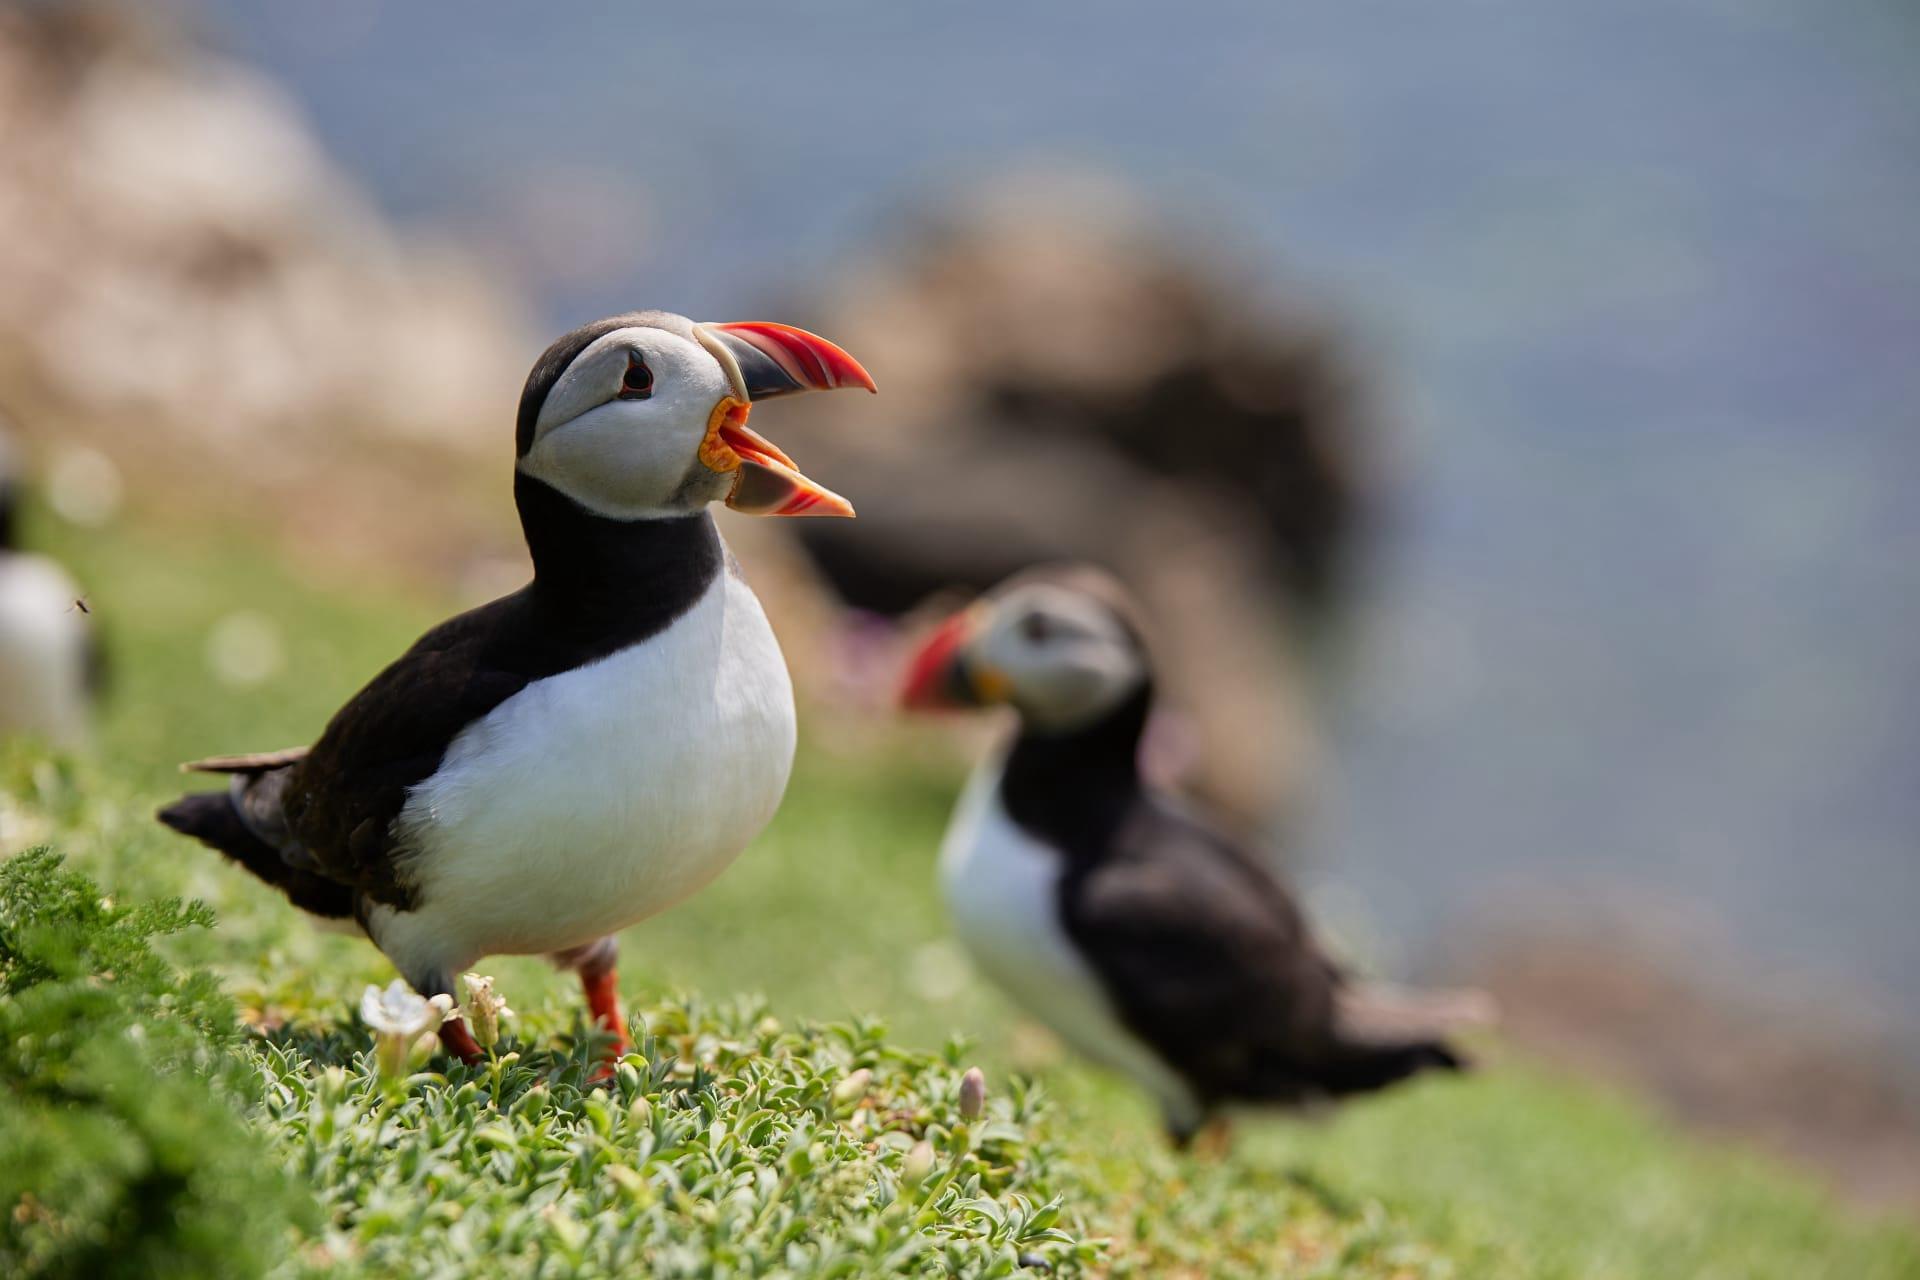 Puffin pictures